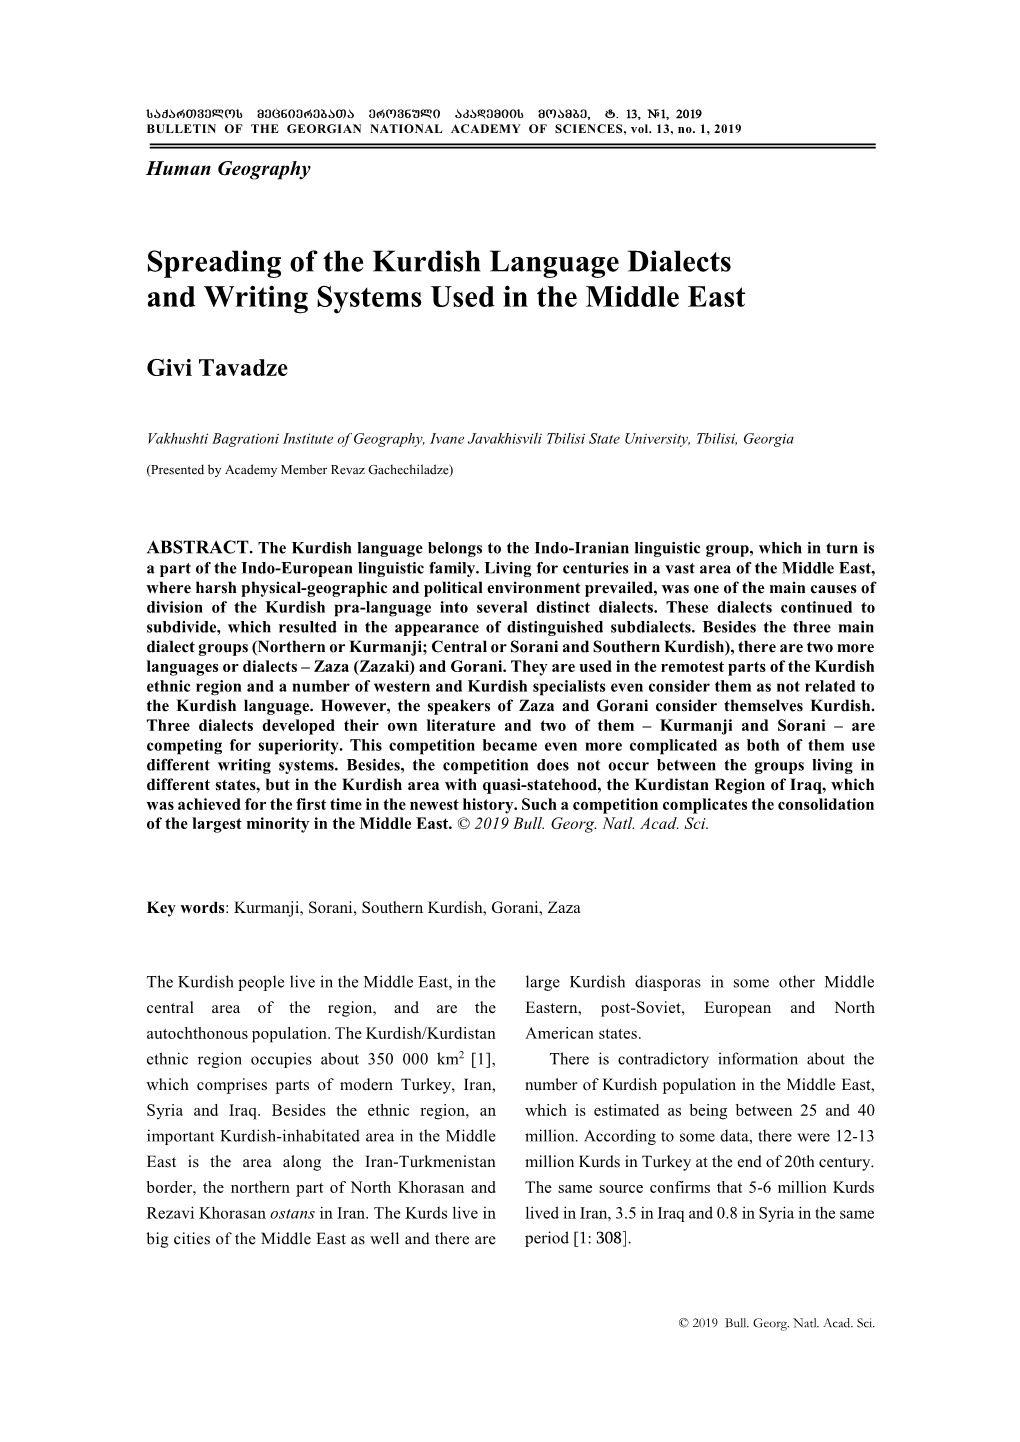 Spreading of the Kurdish Language Dialects and Writing Systems Used in the Middle East